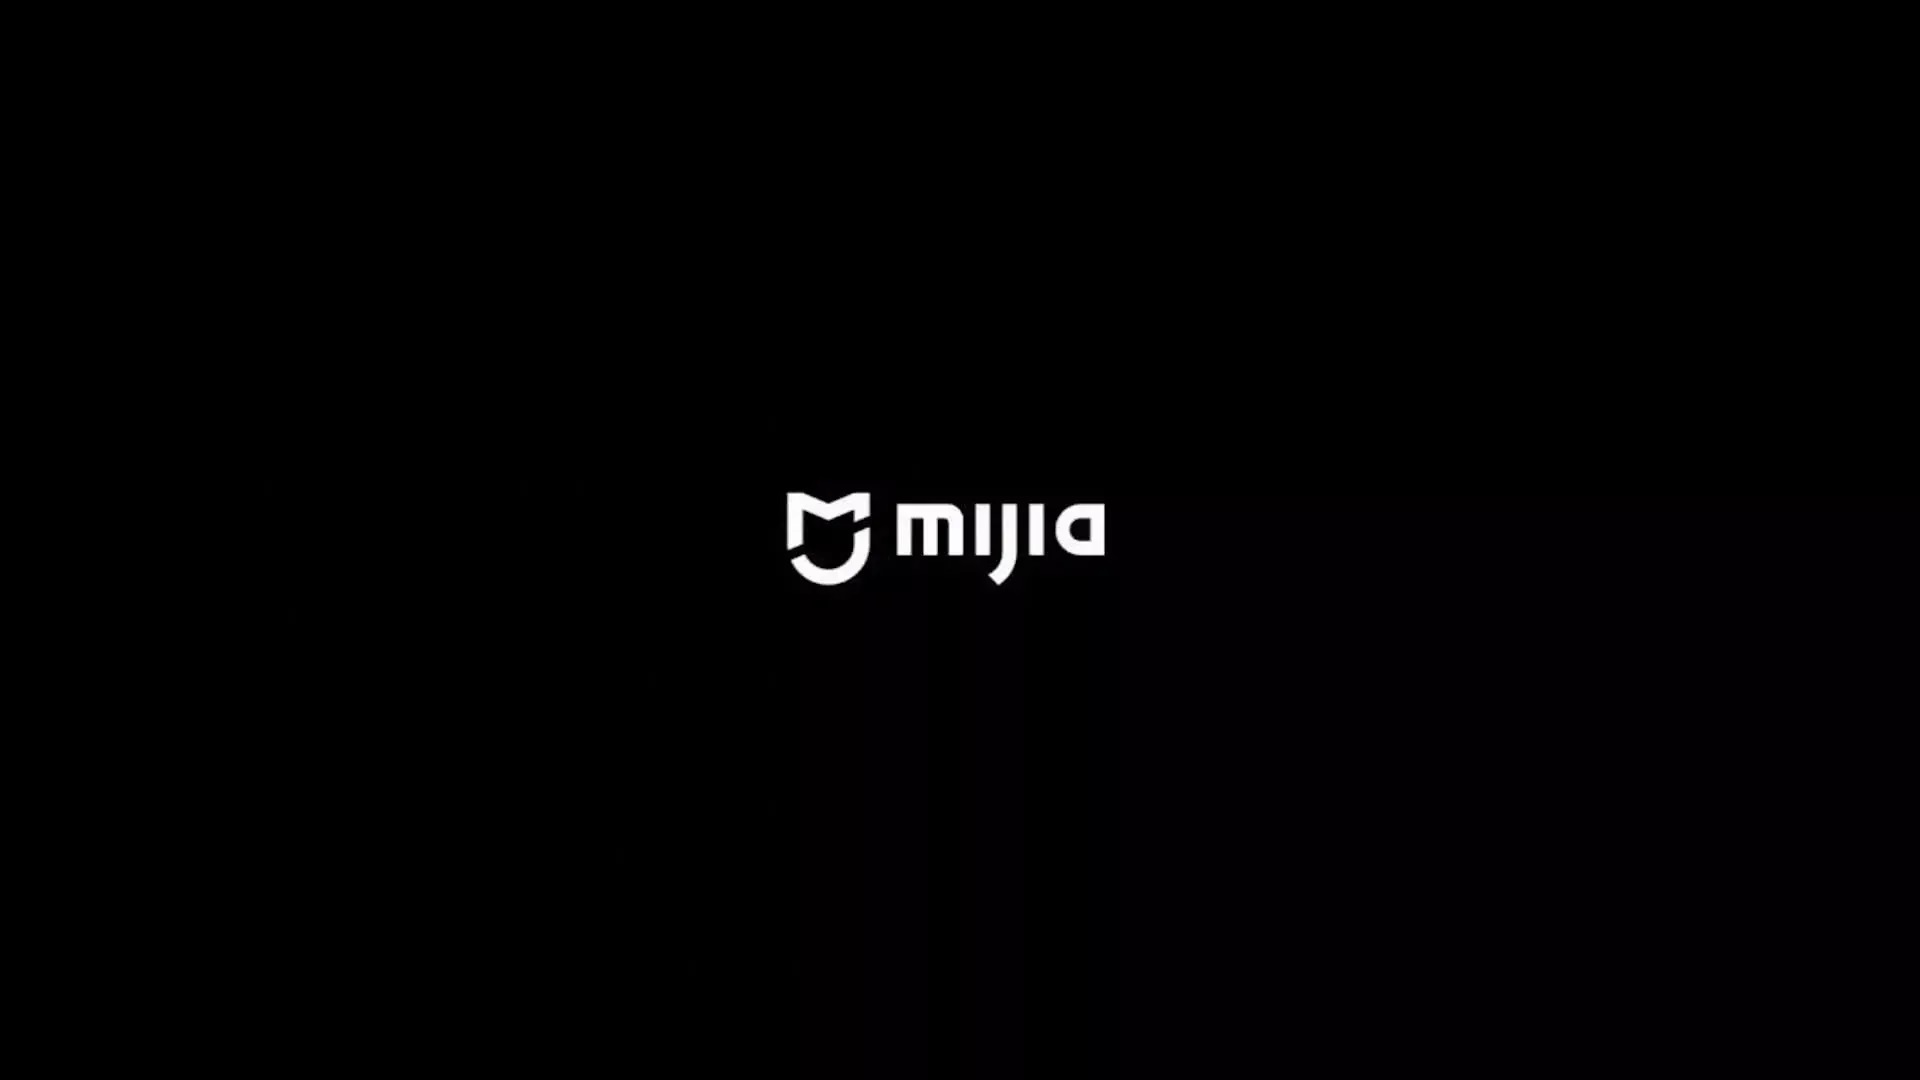 Xiaomi Smart Life - a new name for MiJia brand